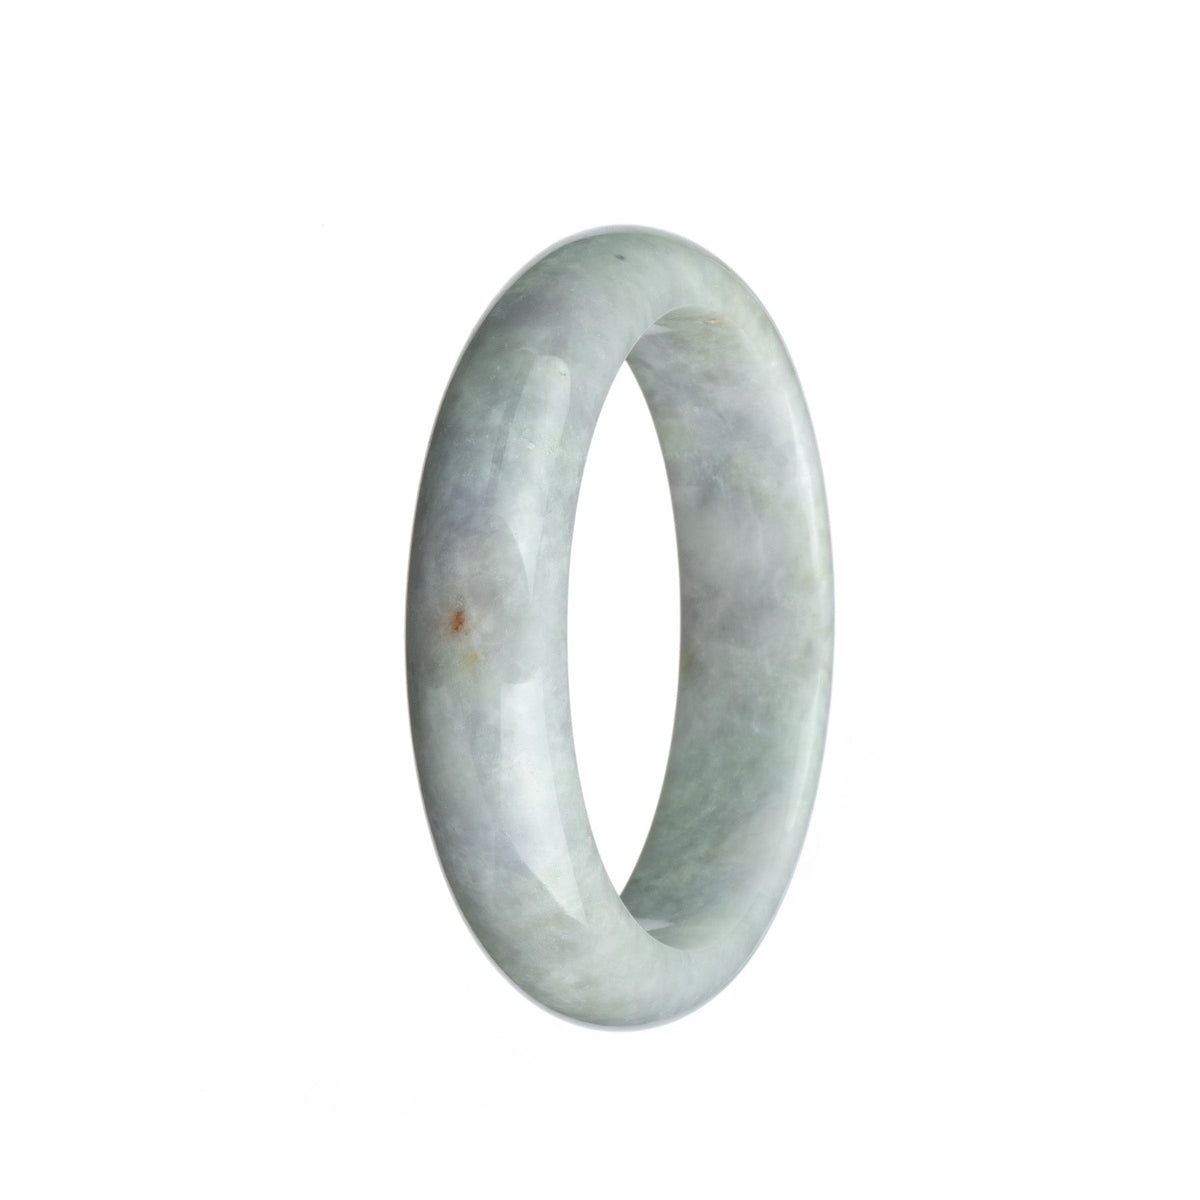 A lavender jade bangle bracelet with a half moon shape, untreated and genuine, sold by MAYS.